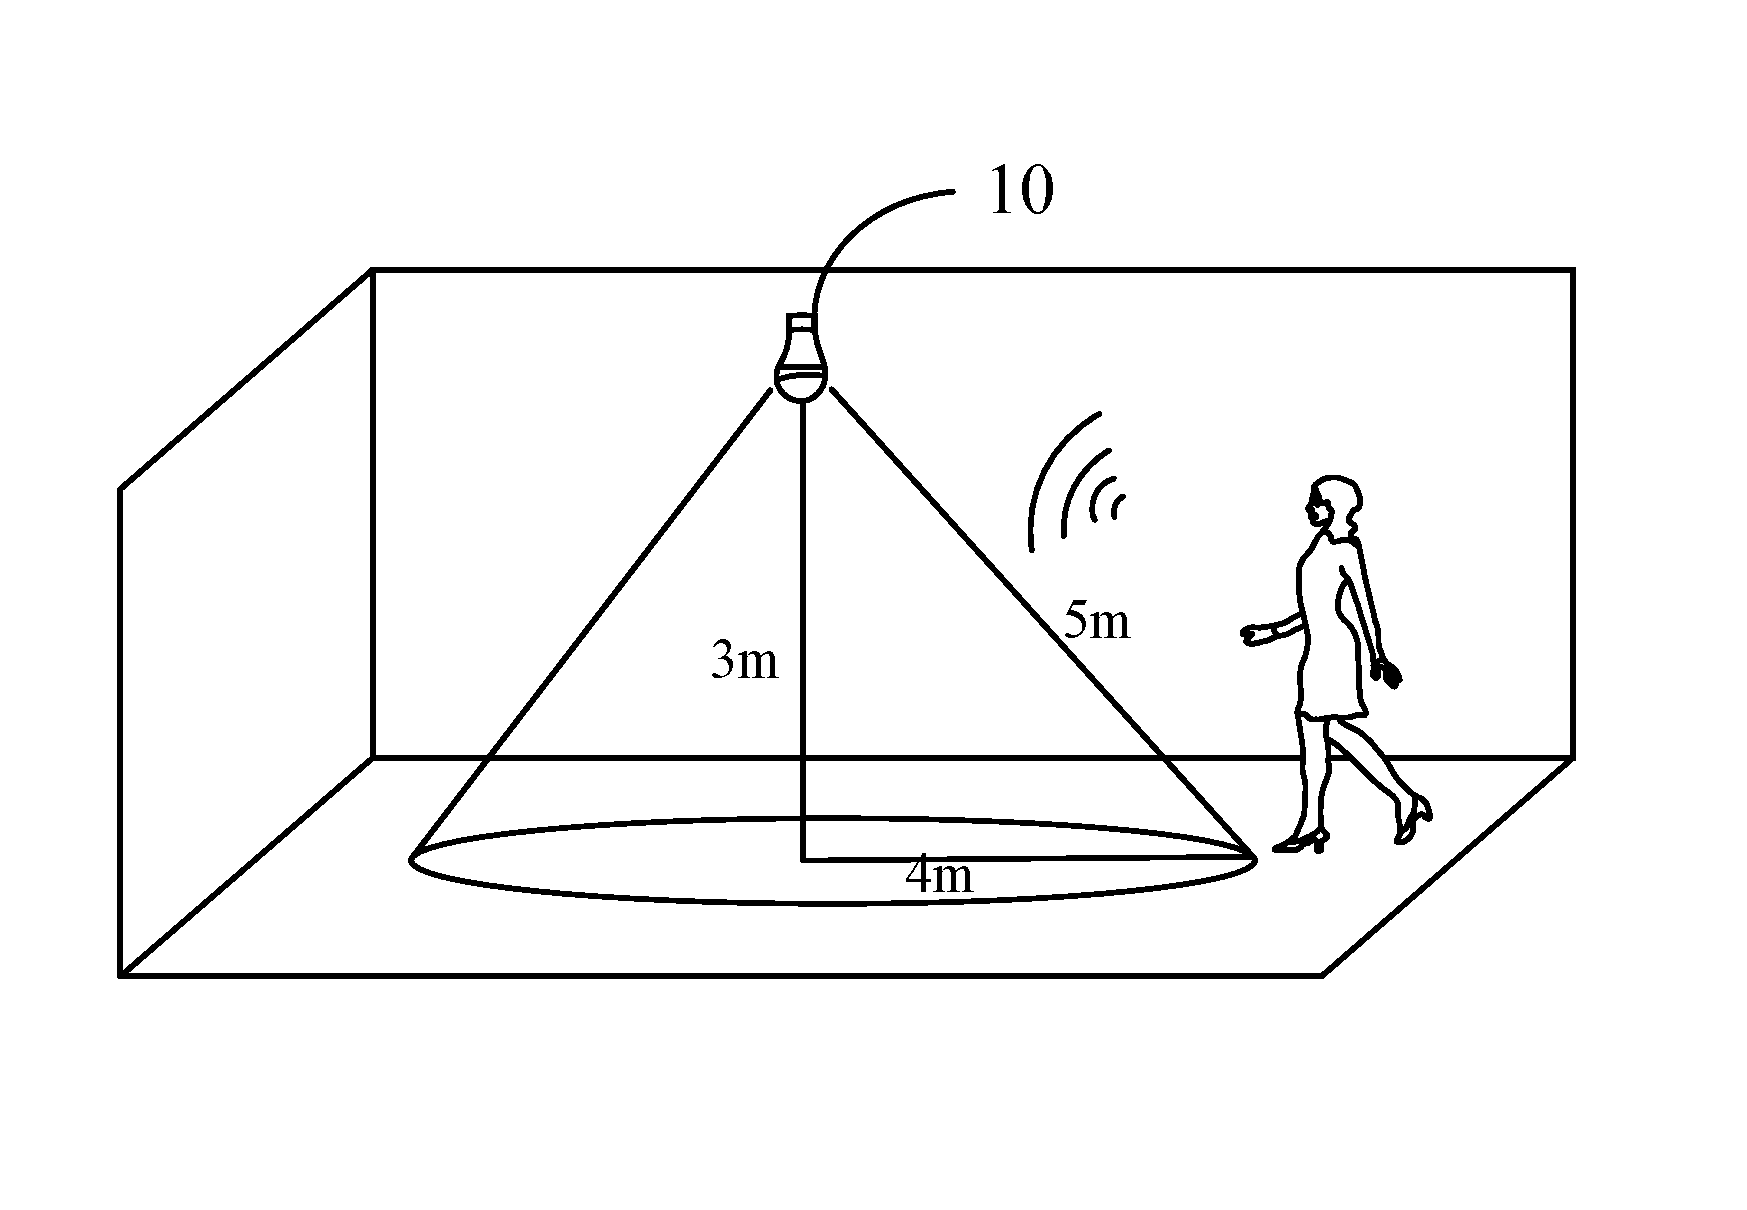 Lighting device with microwave detection function